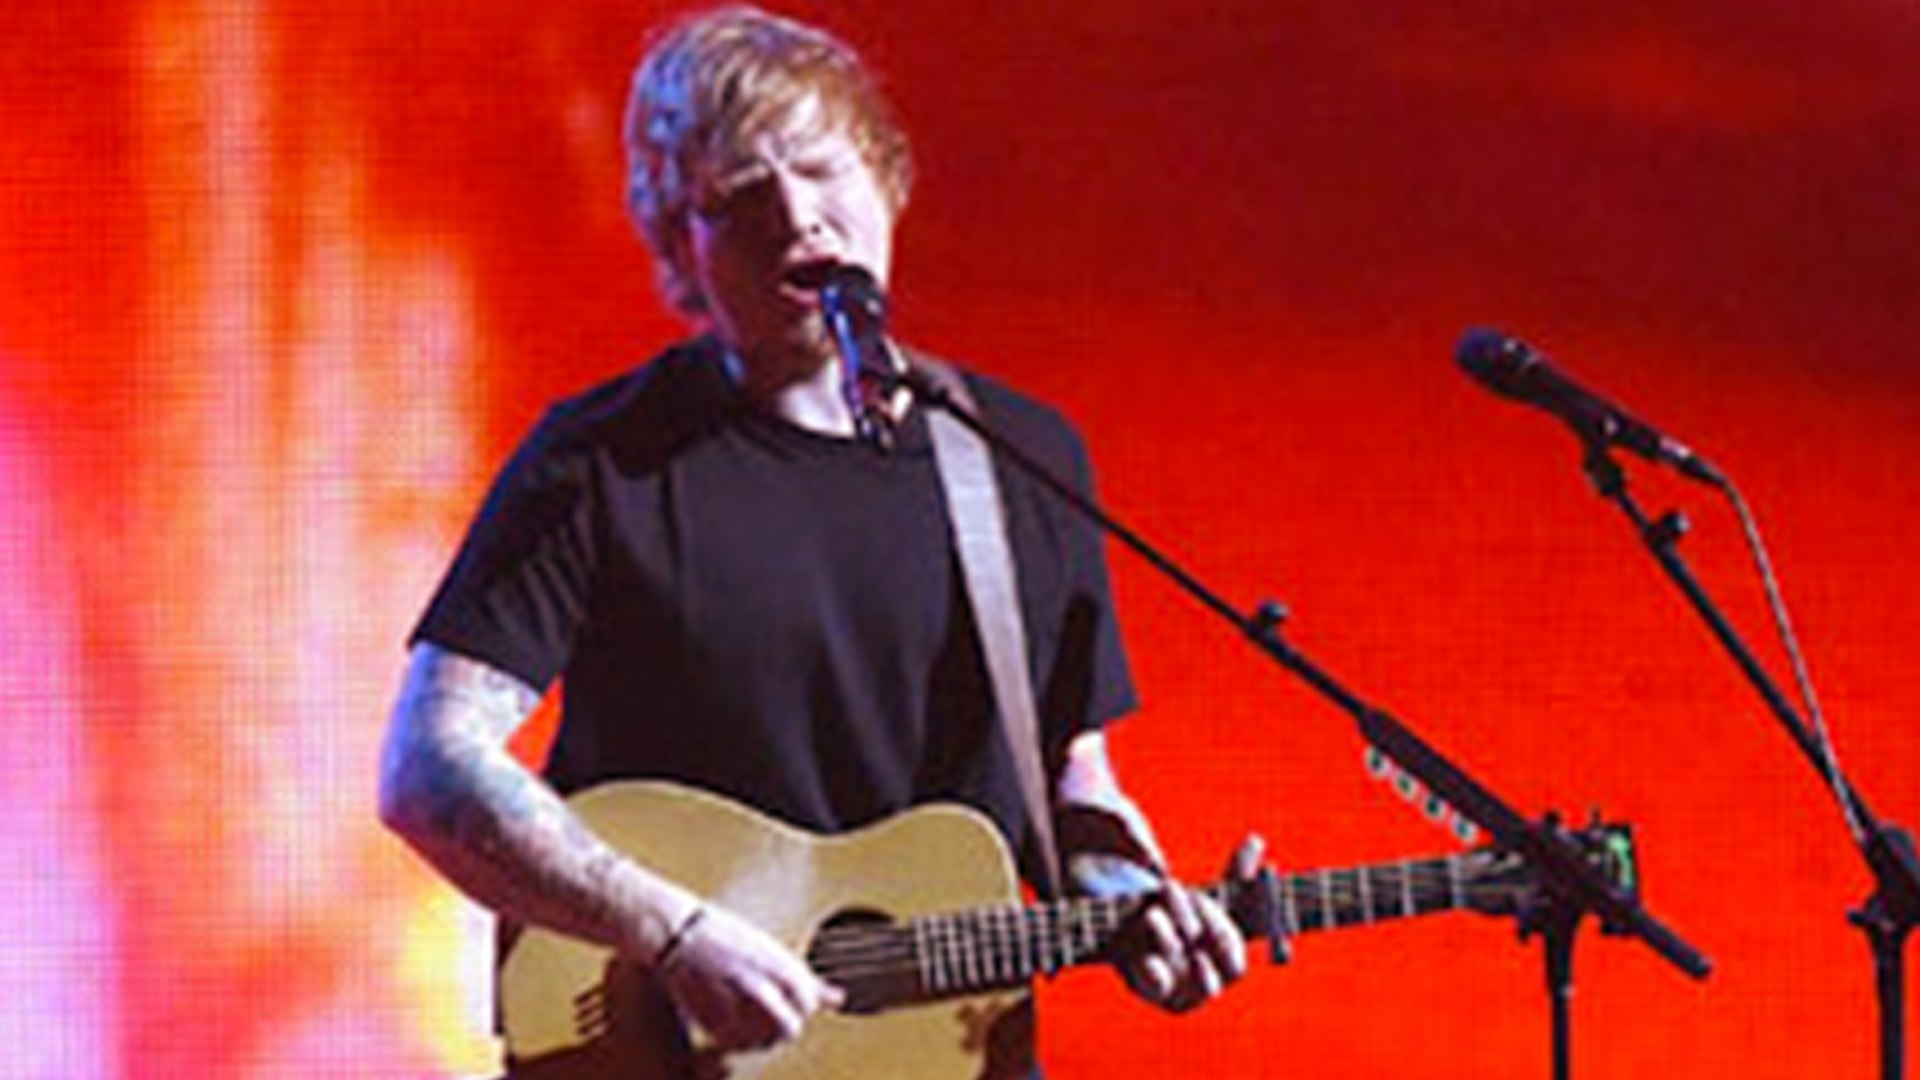 Ed Sheeran Drops 2 New Songs ‘Shape Of You’ and ‘Castle On The Hill’